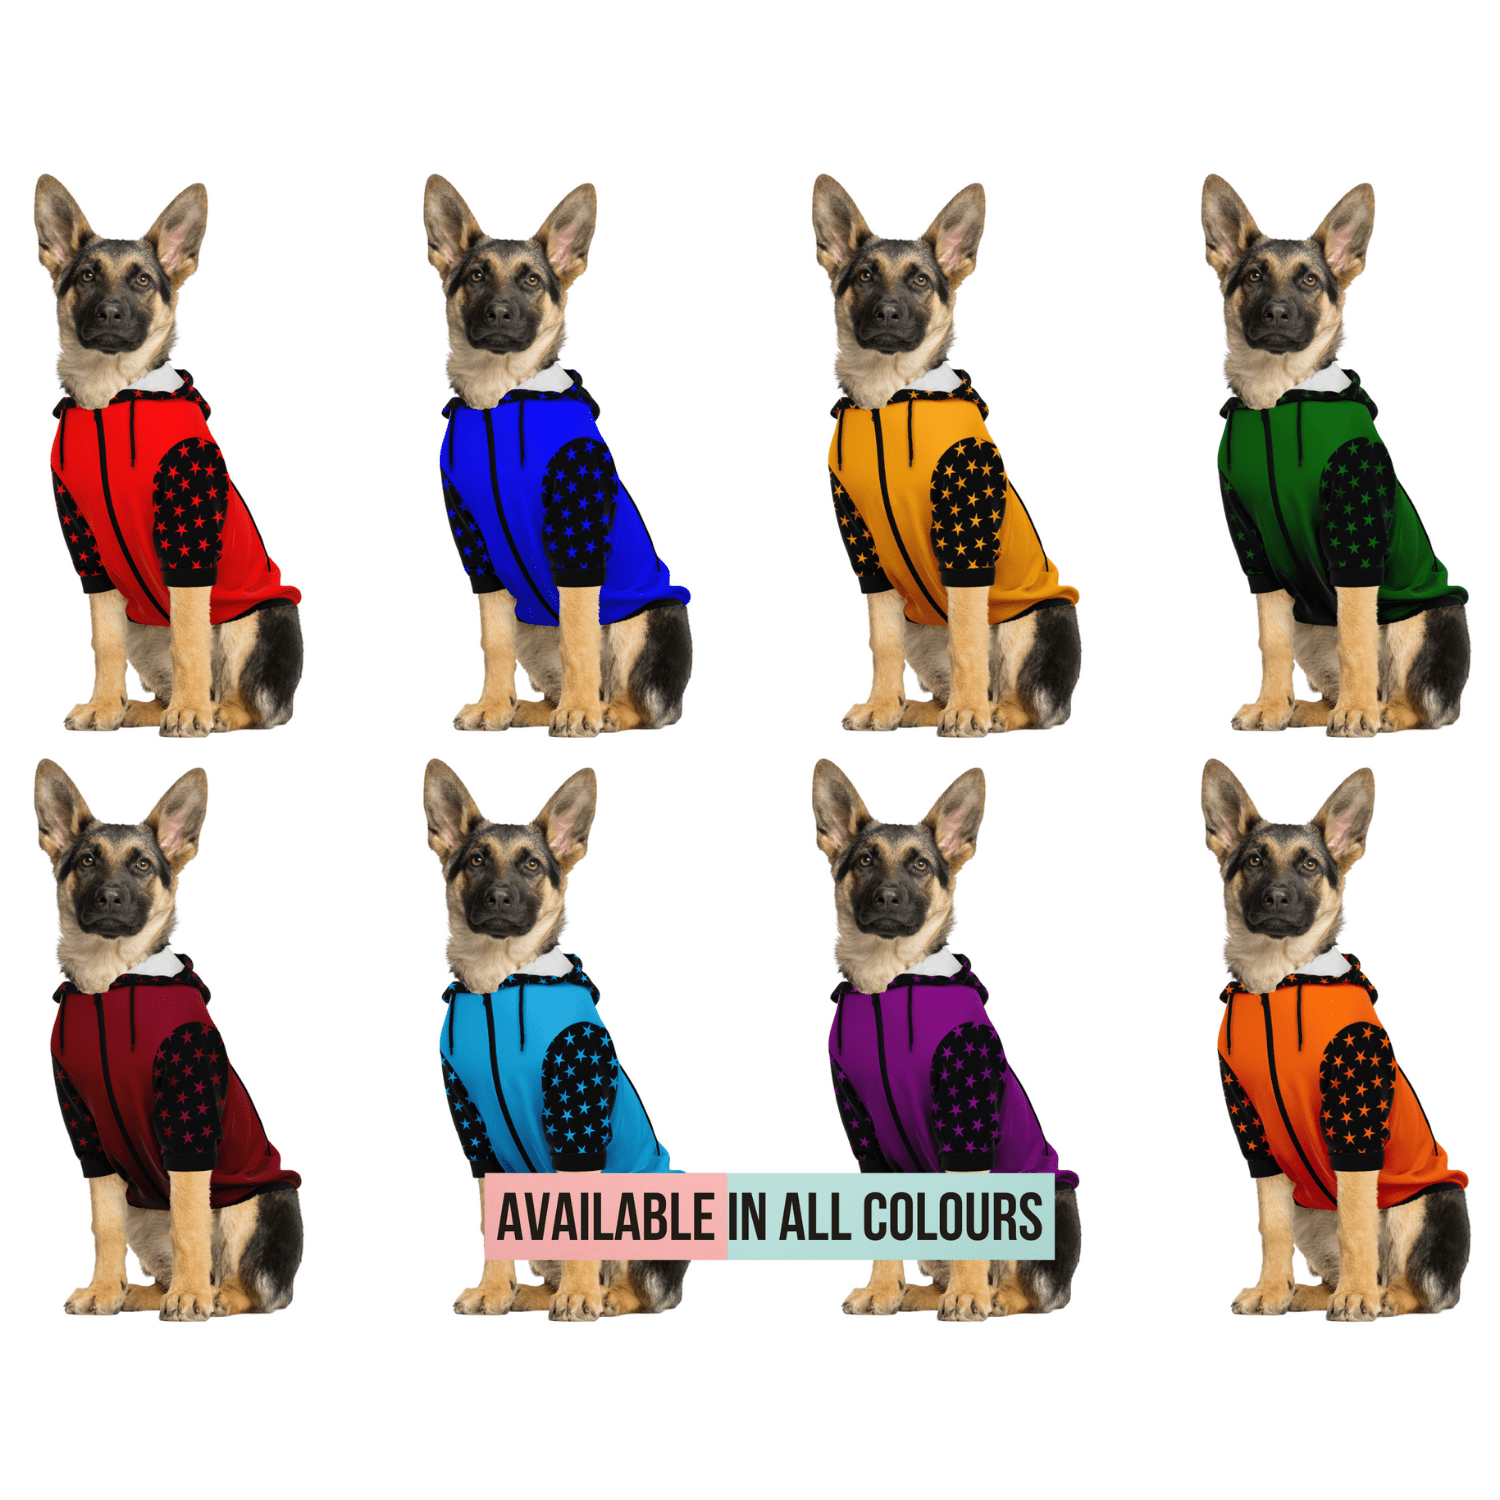 Matching Service Dog & Owner Hoodies